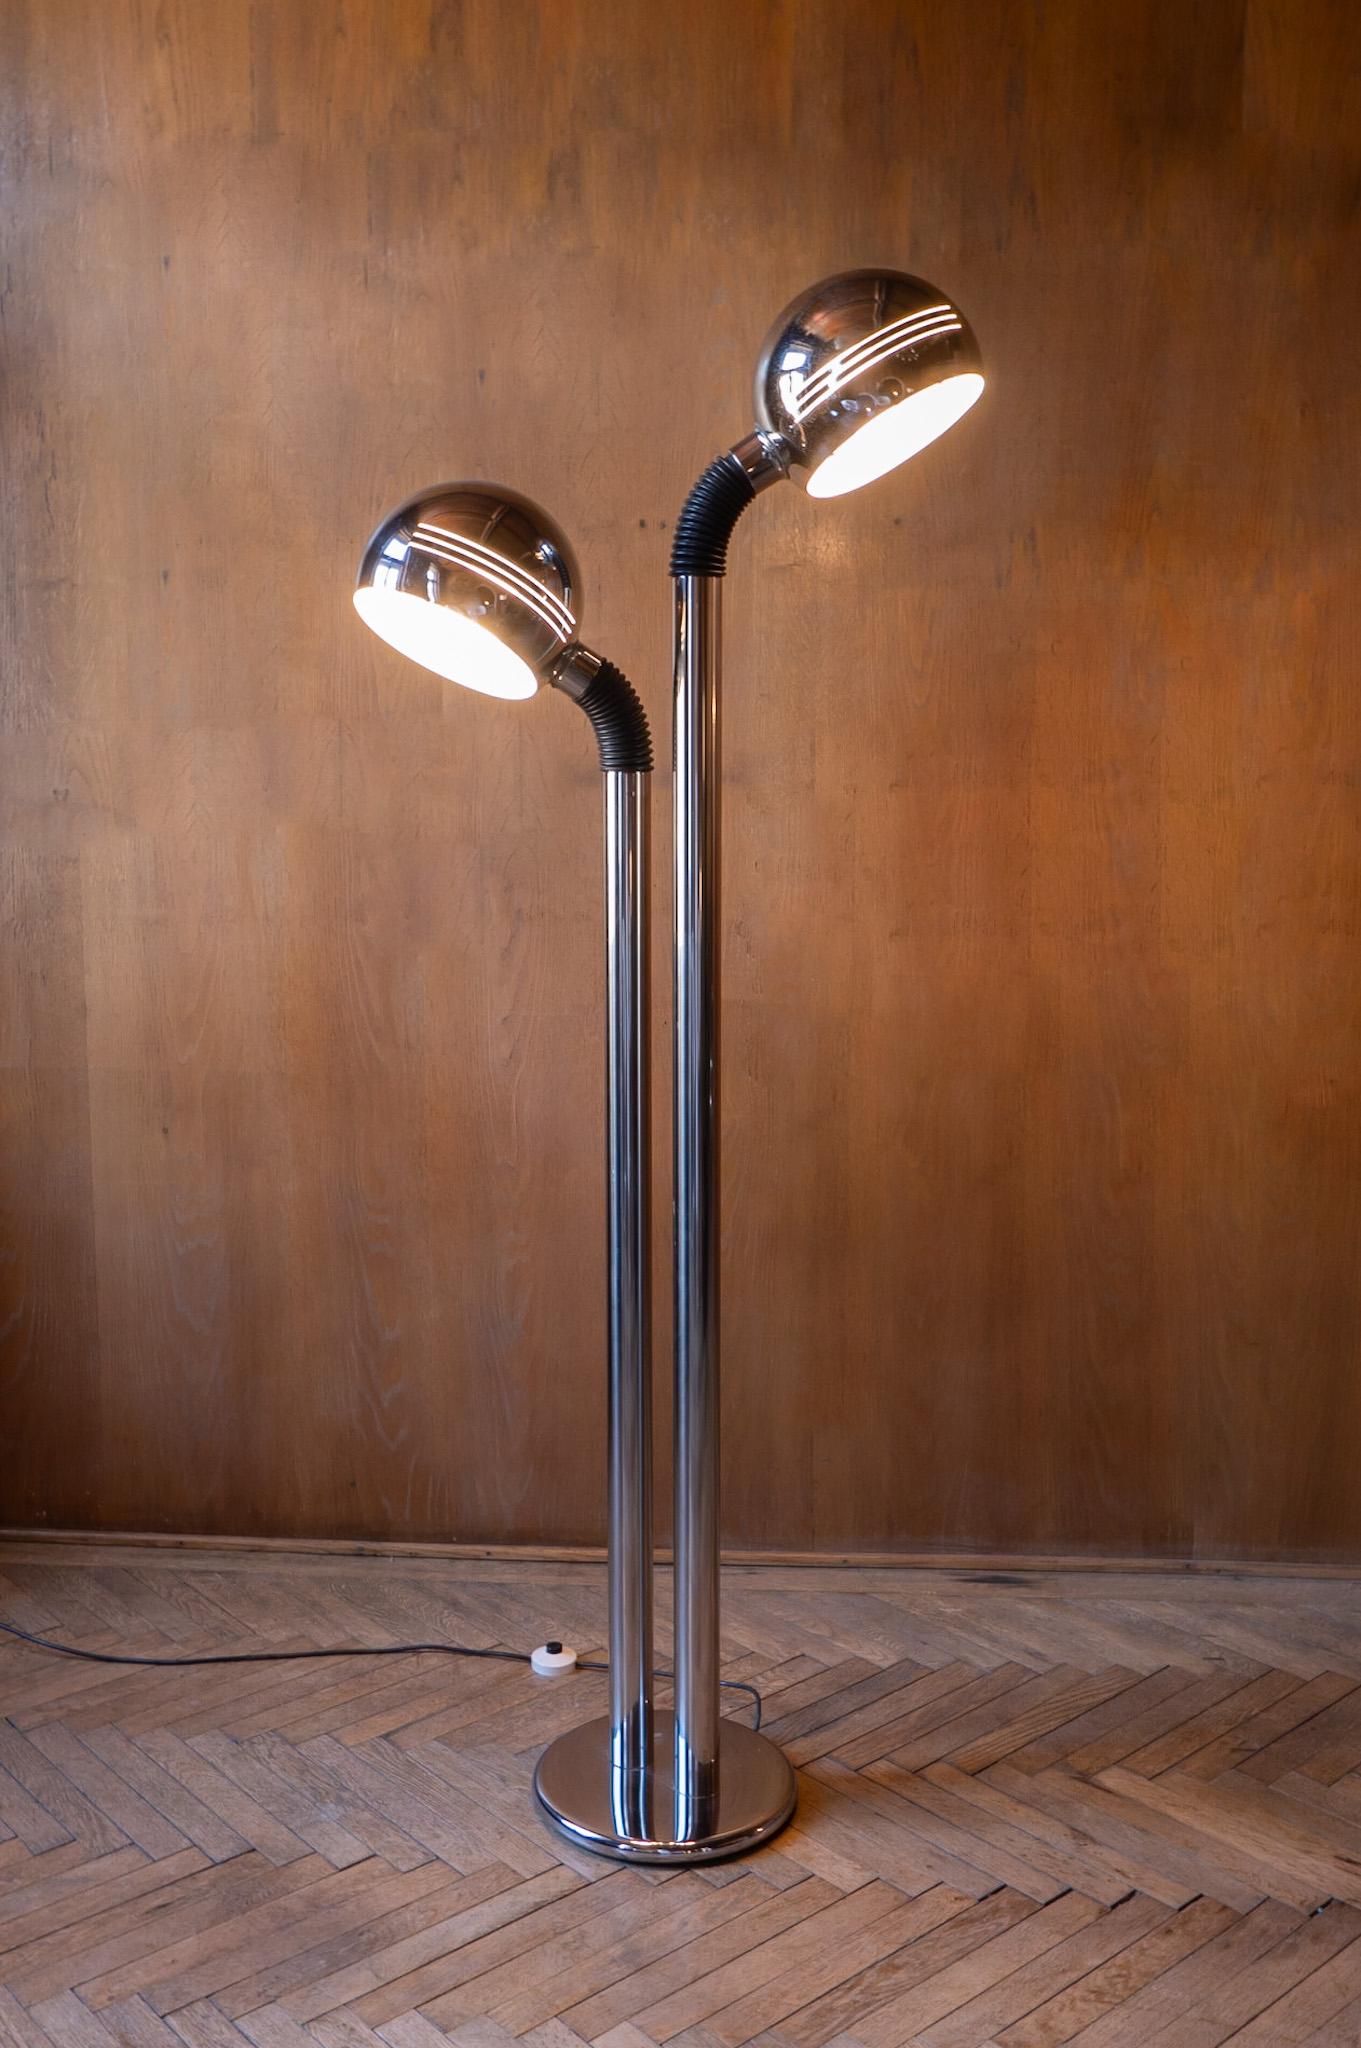 Mid-Century Modern Chrome Black Floor Lamp by Goffreddo Reggiani, Italy 1970s.

This metal floor lamp designed by Goffreddo Reggiani was produced in the 70’s by the Italian manufacture Targetti Sankey. This floor lamp features two rotating heads in